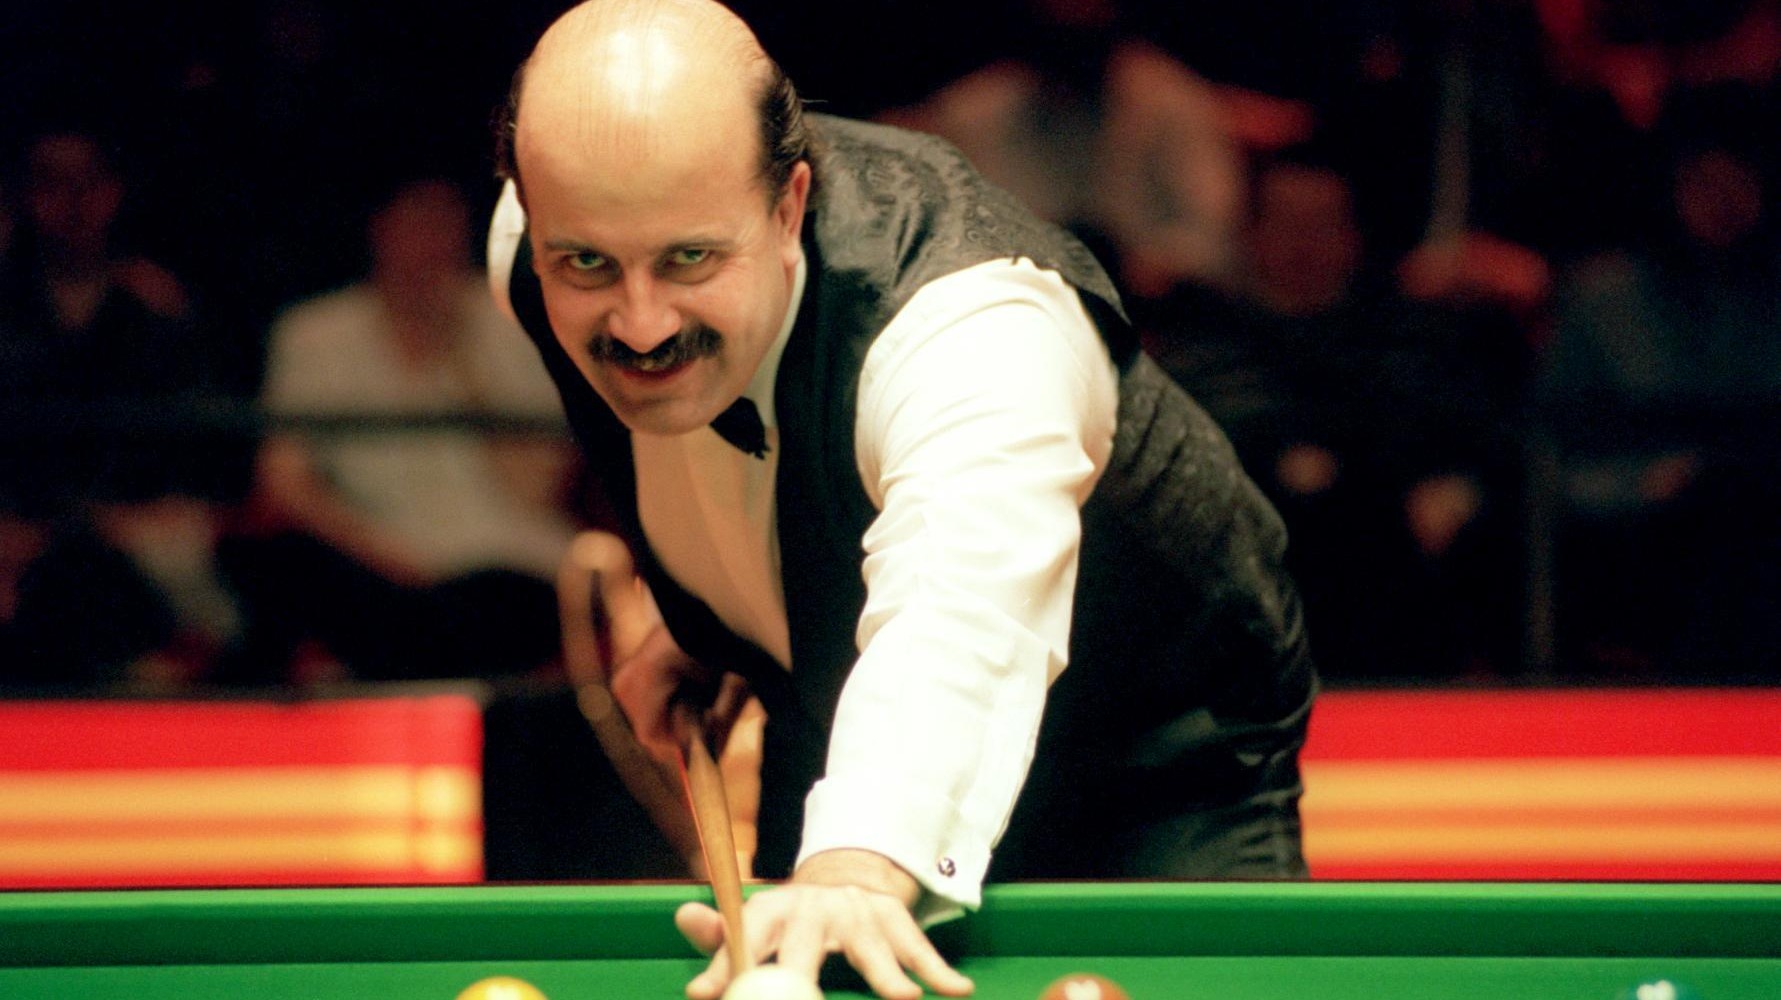 Snooker legend Willie Thorne dies aged 66 after being placed in induced coma and respiratory failure ITV News